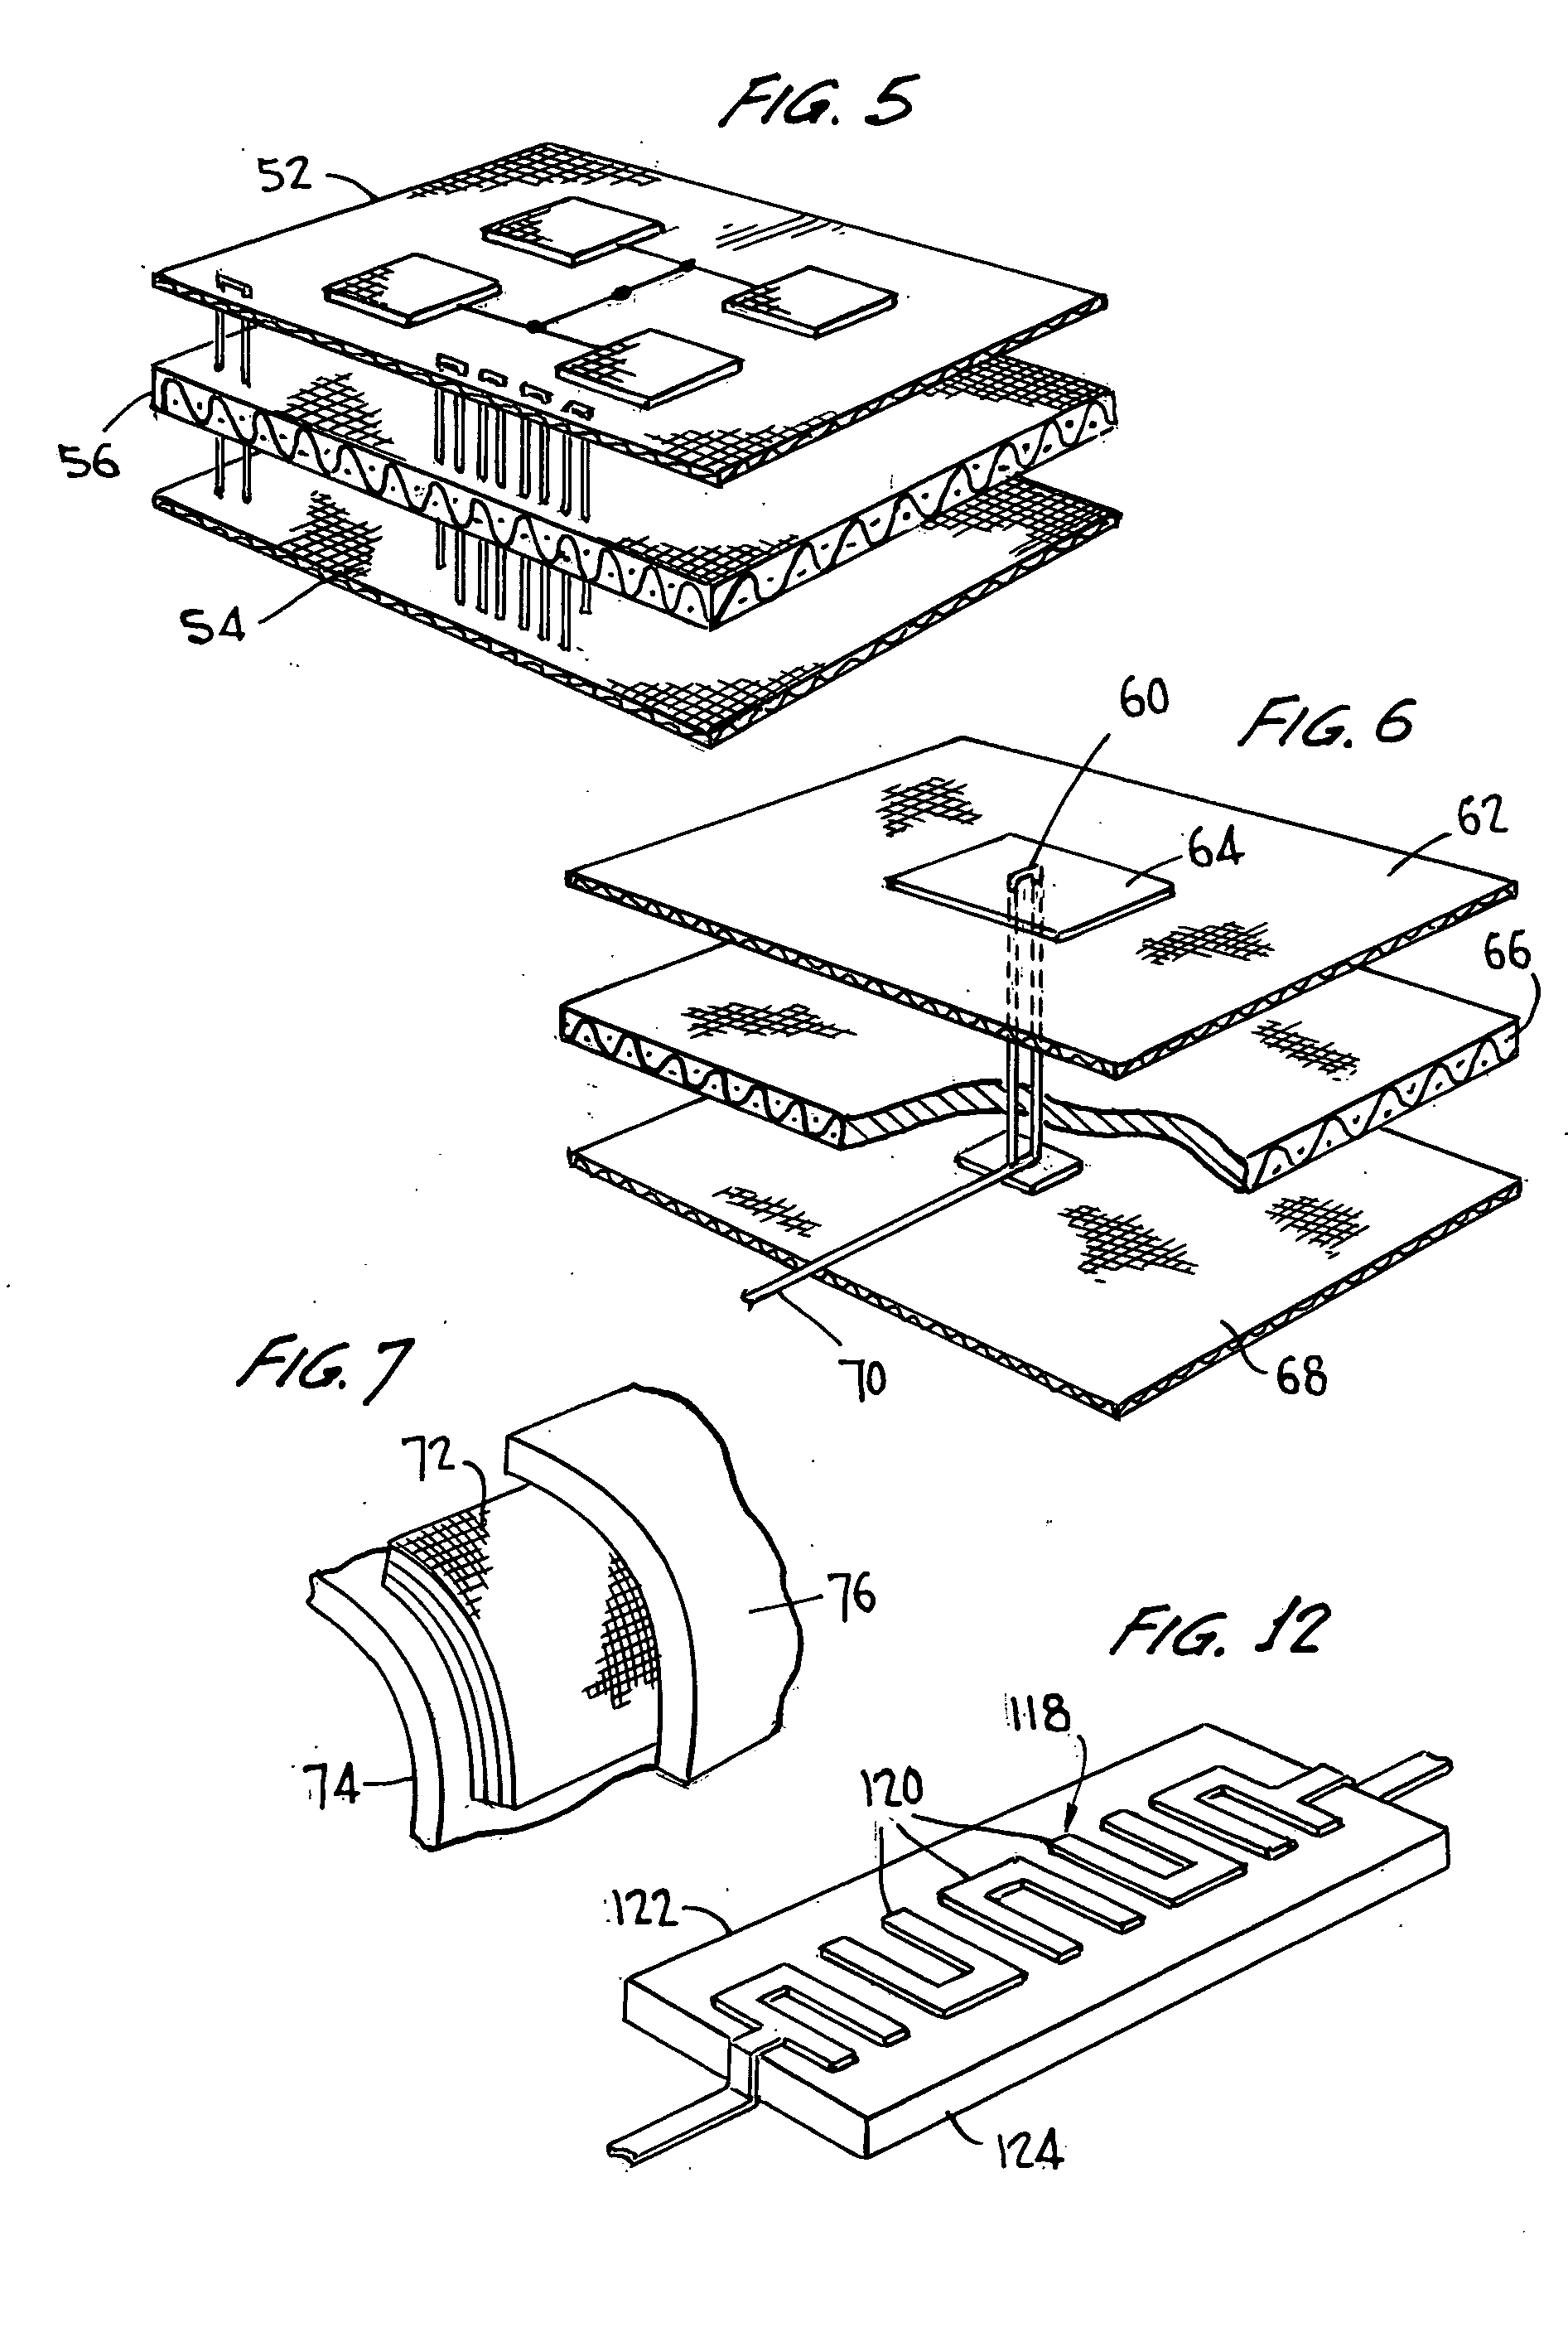 Method for constructing antennas from textile fabrics and components